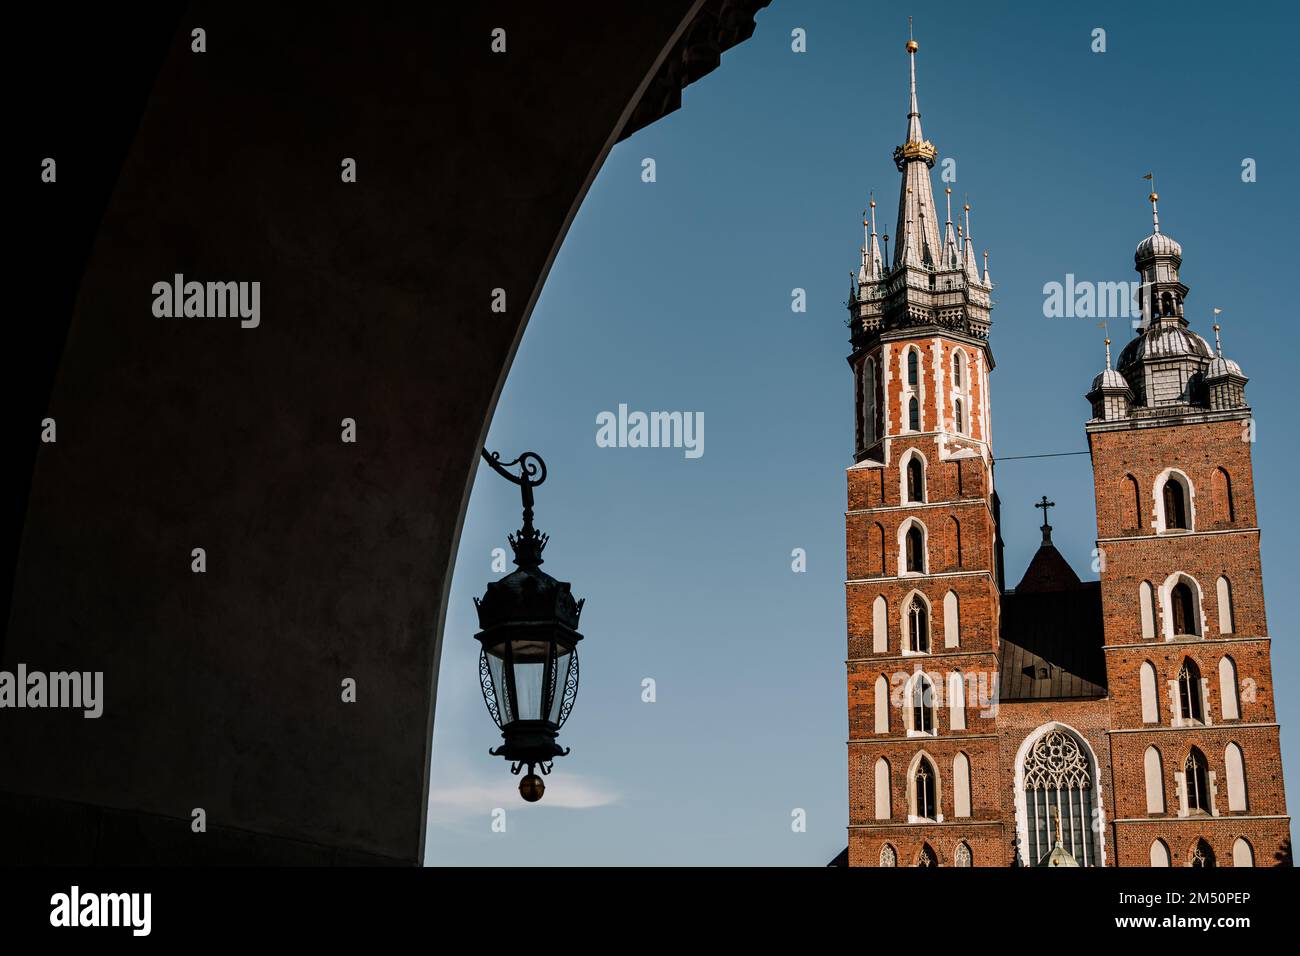 St. Mary's Basilica at Market Square in the Old Town of Krakow, Poland. View through archway with lantern. Stock Photo